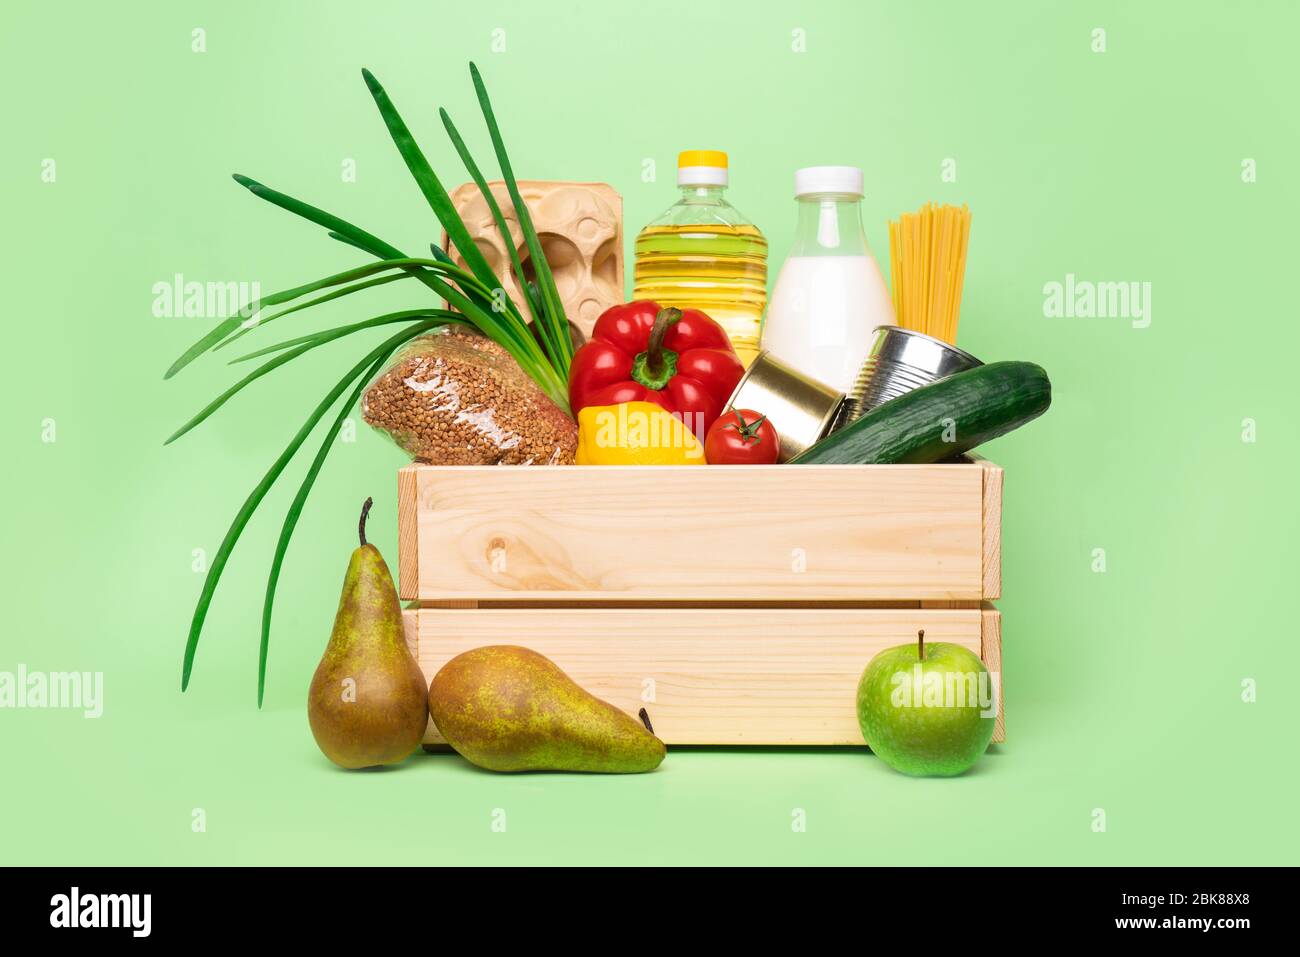 donation or delivery wooden box with food on green background. Stock Photo